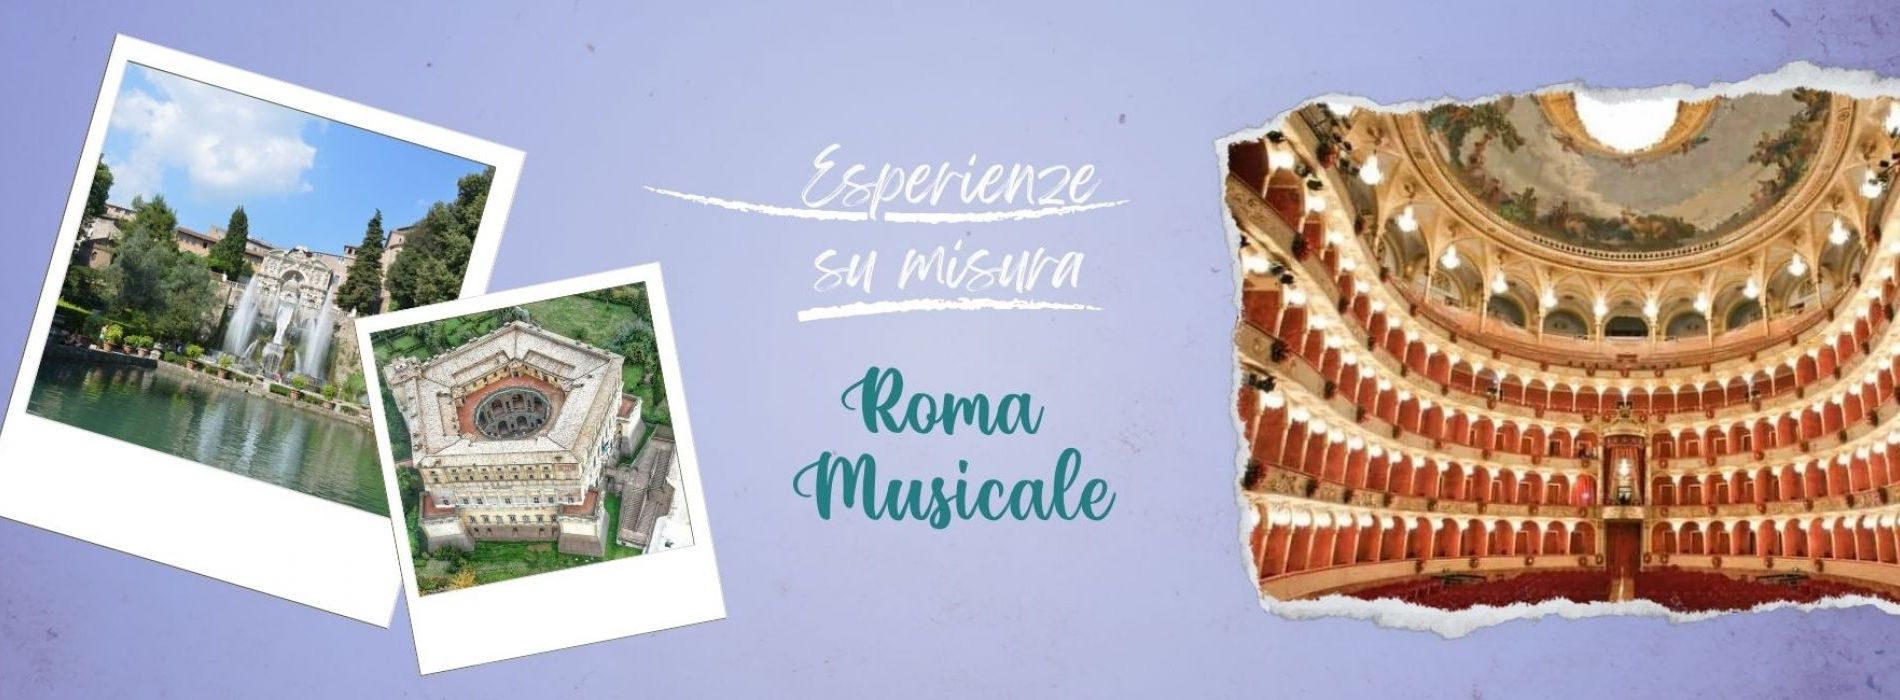 Daily experience: Roma Musicale